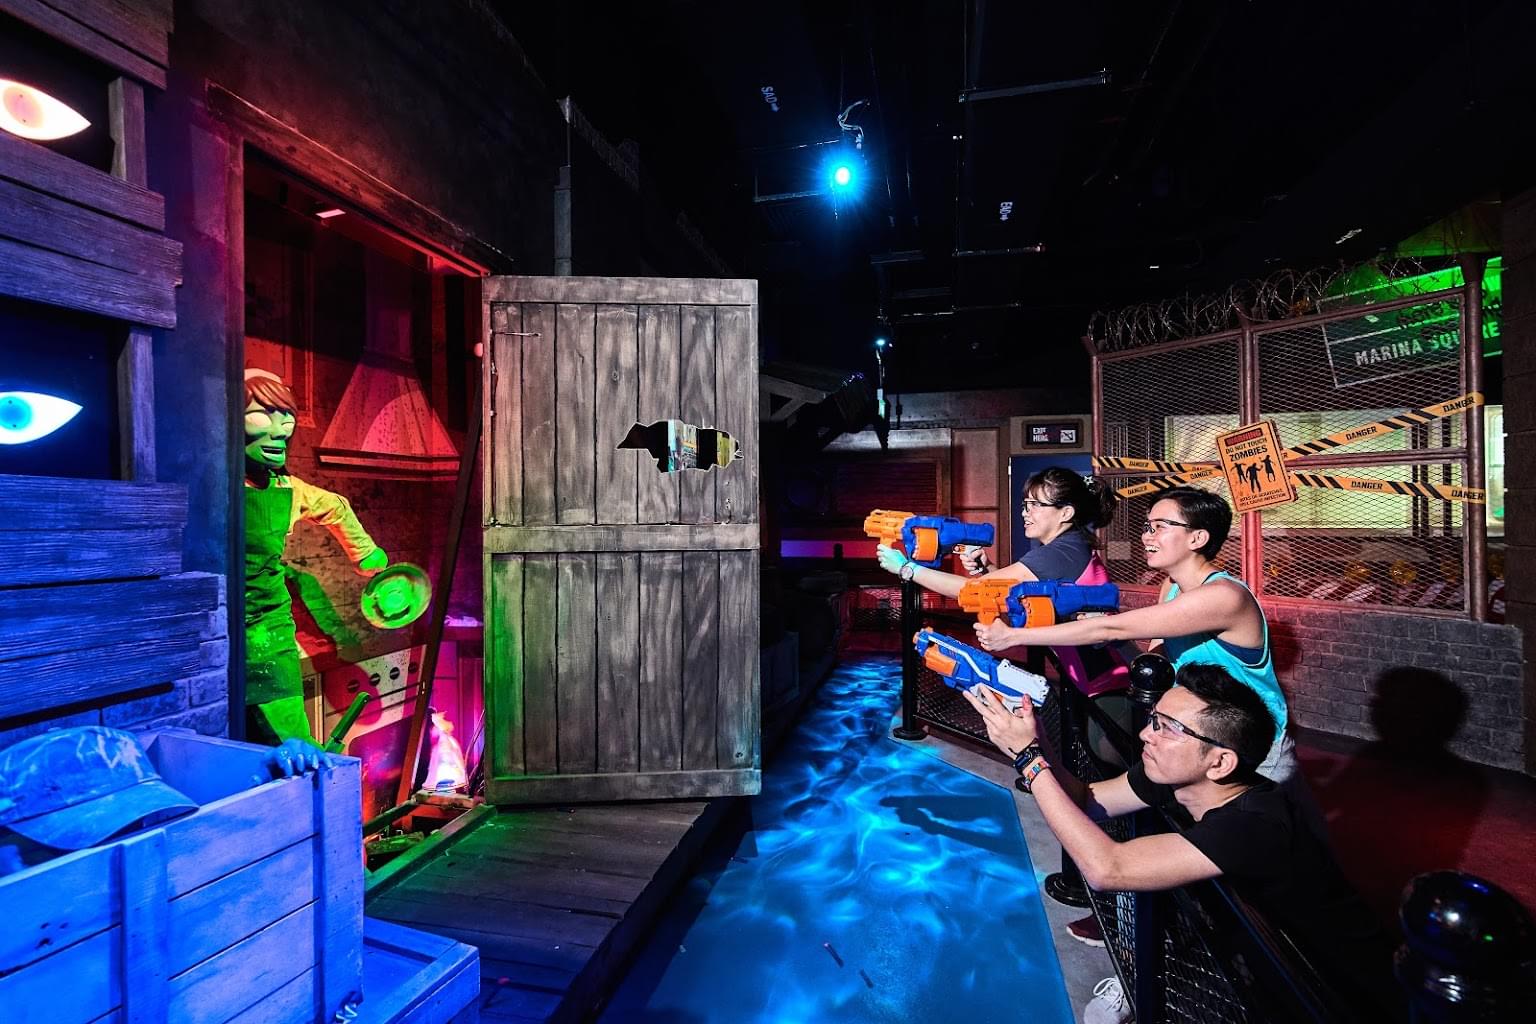 Shoot down the Zombies at Combat Zone